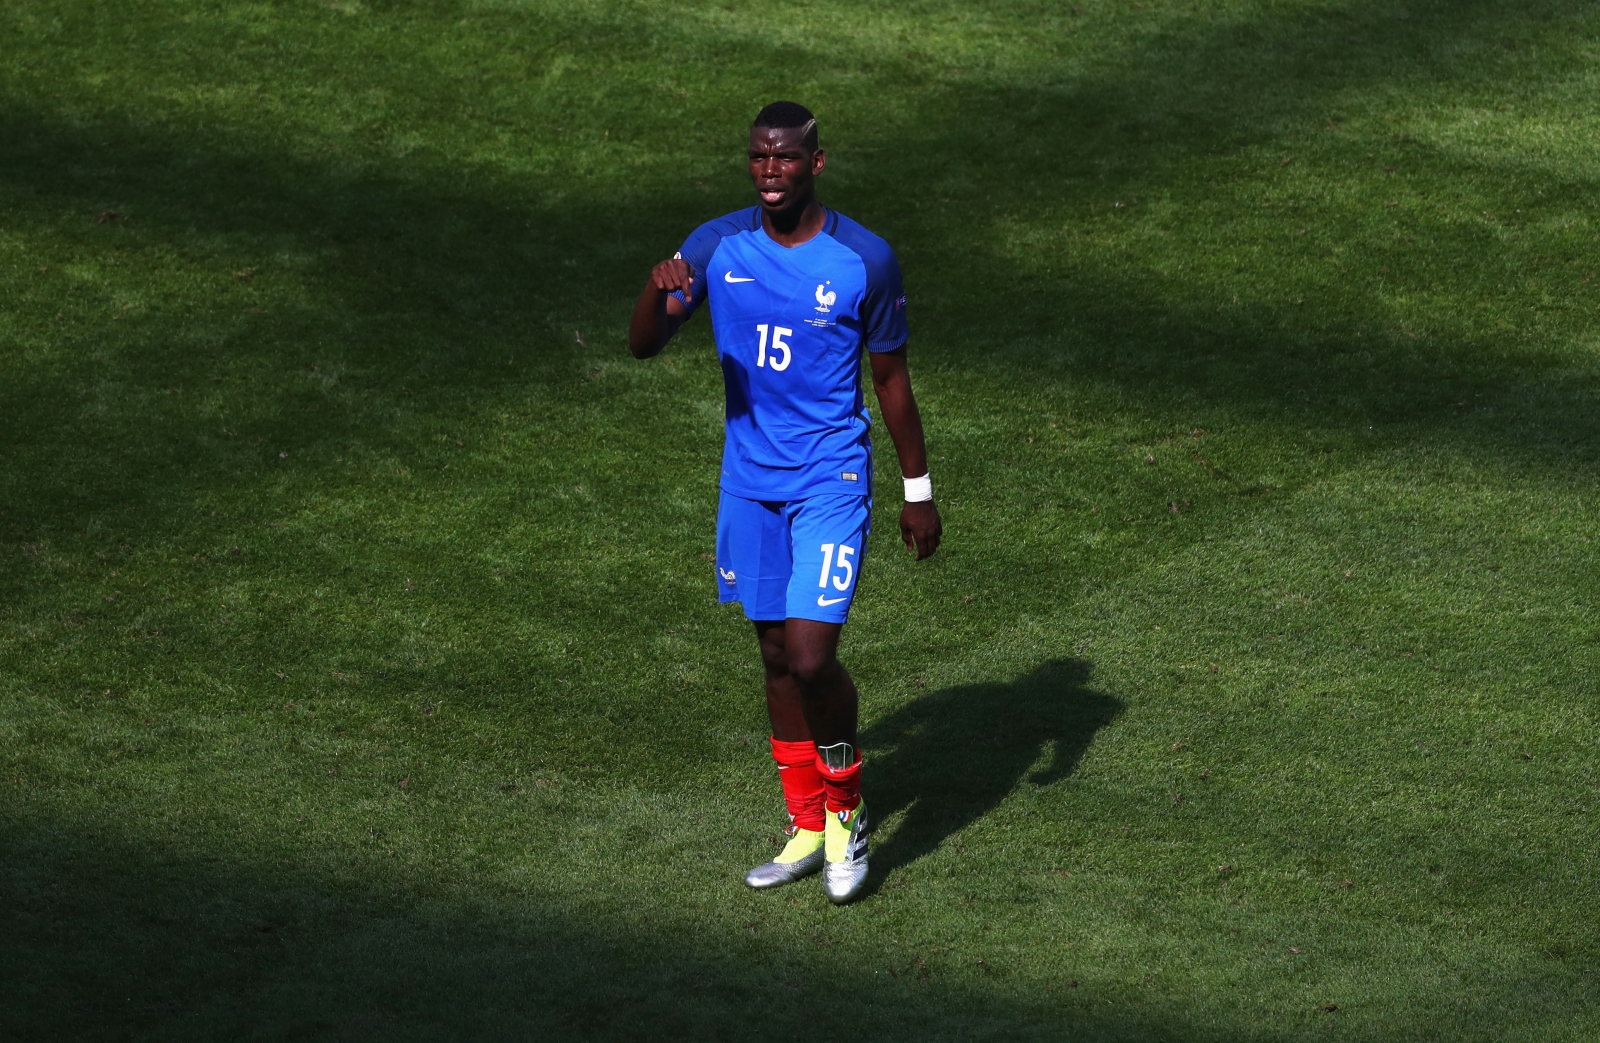 Manchester United to offer Paul Pogba £300,000-a-week to complete £100m transfer